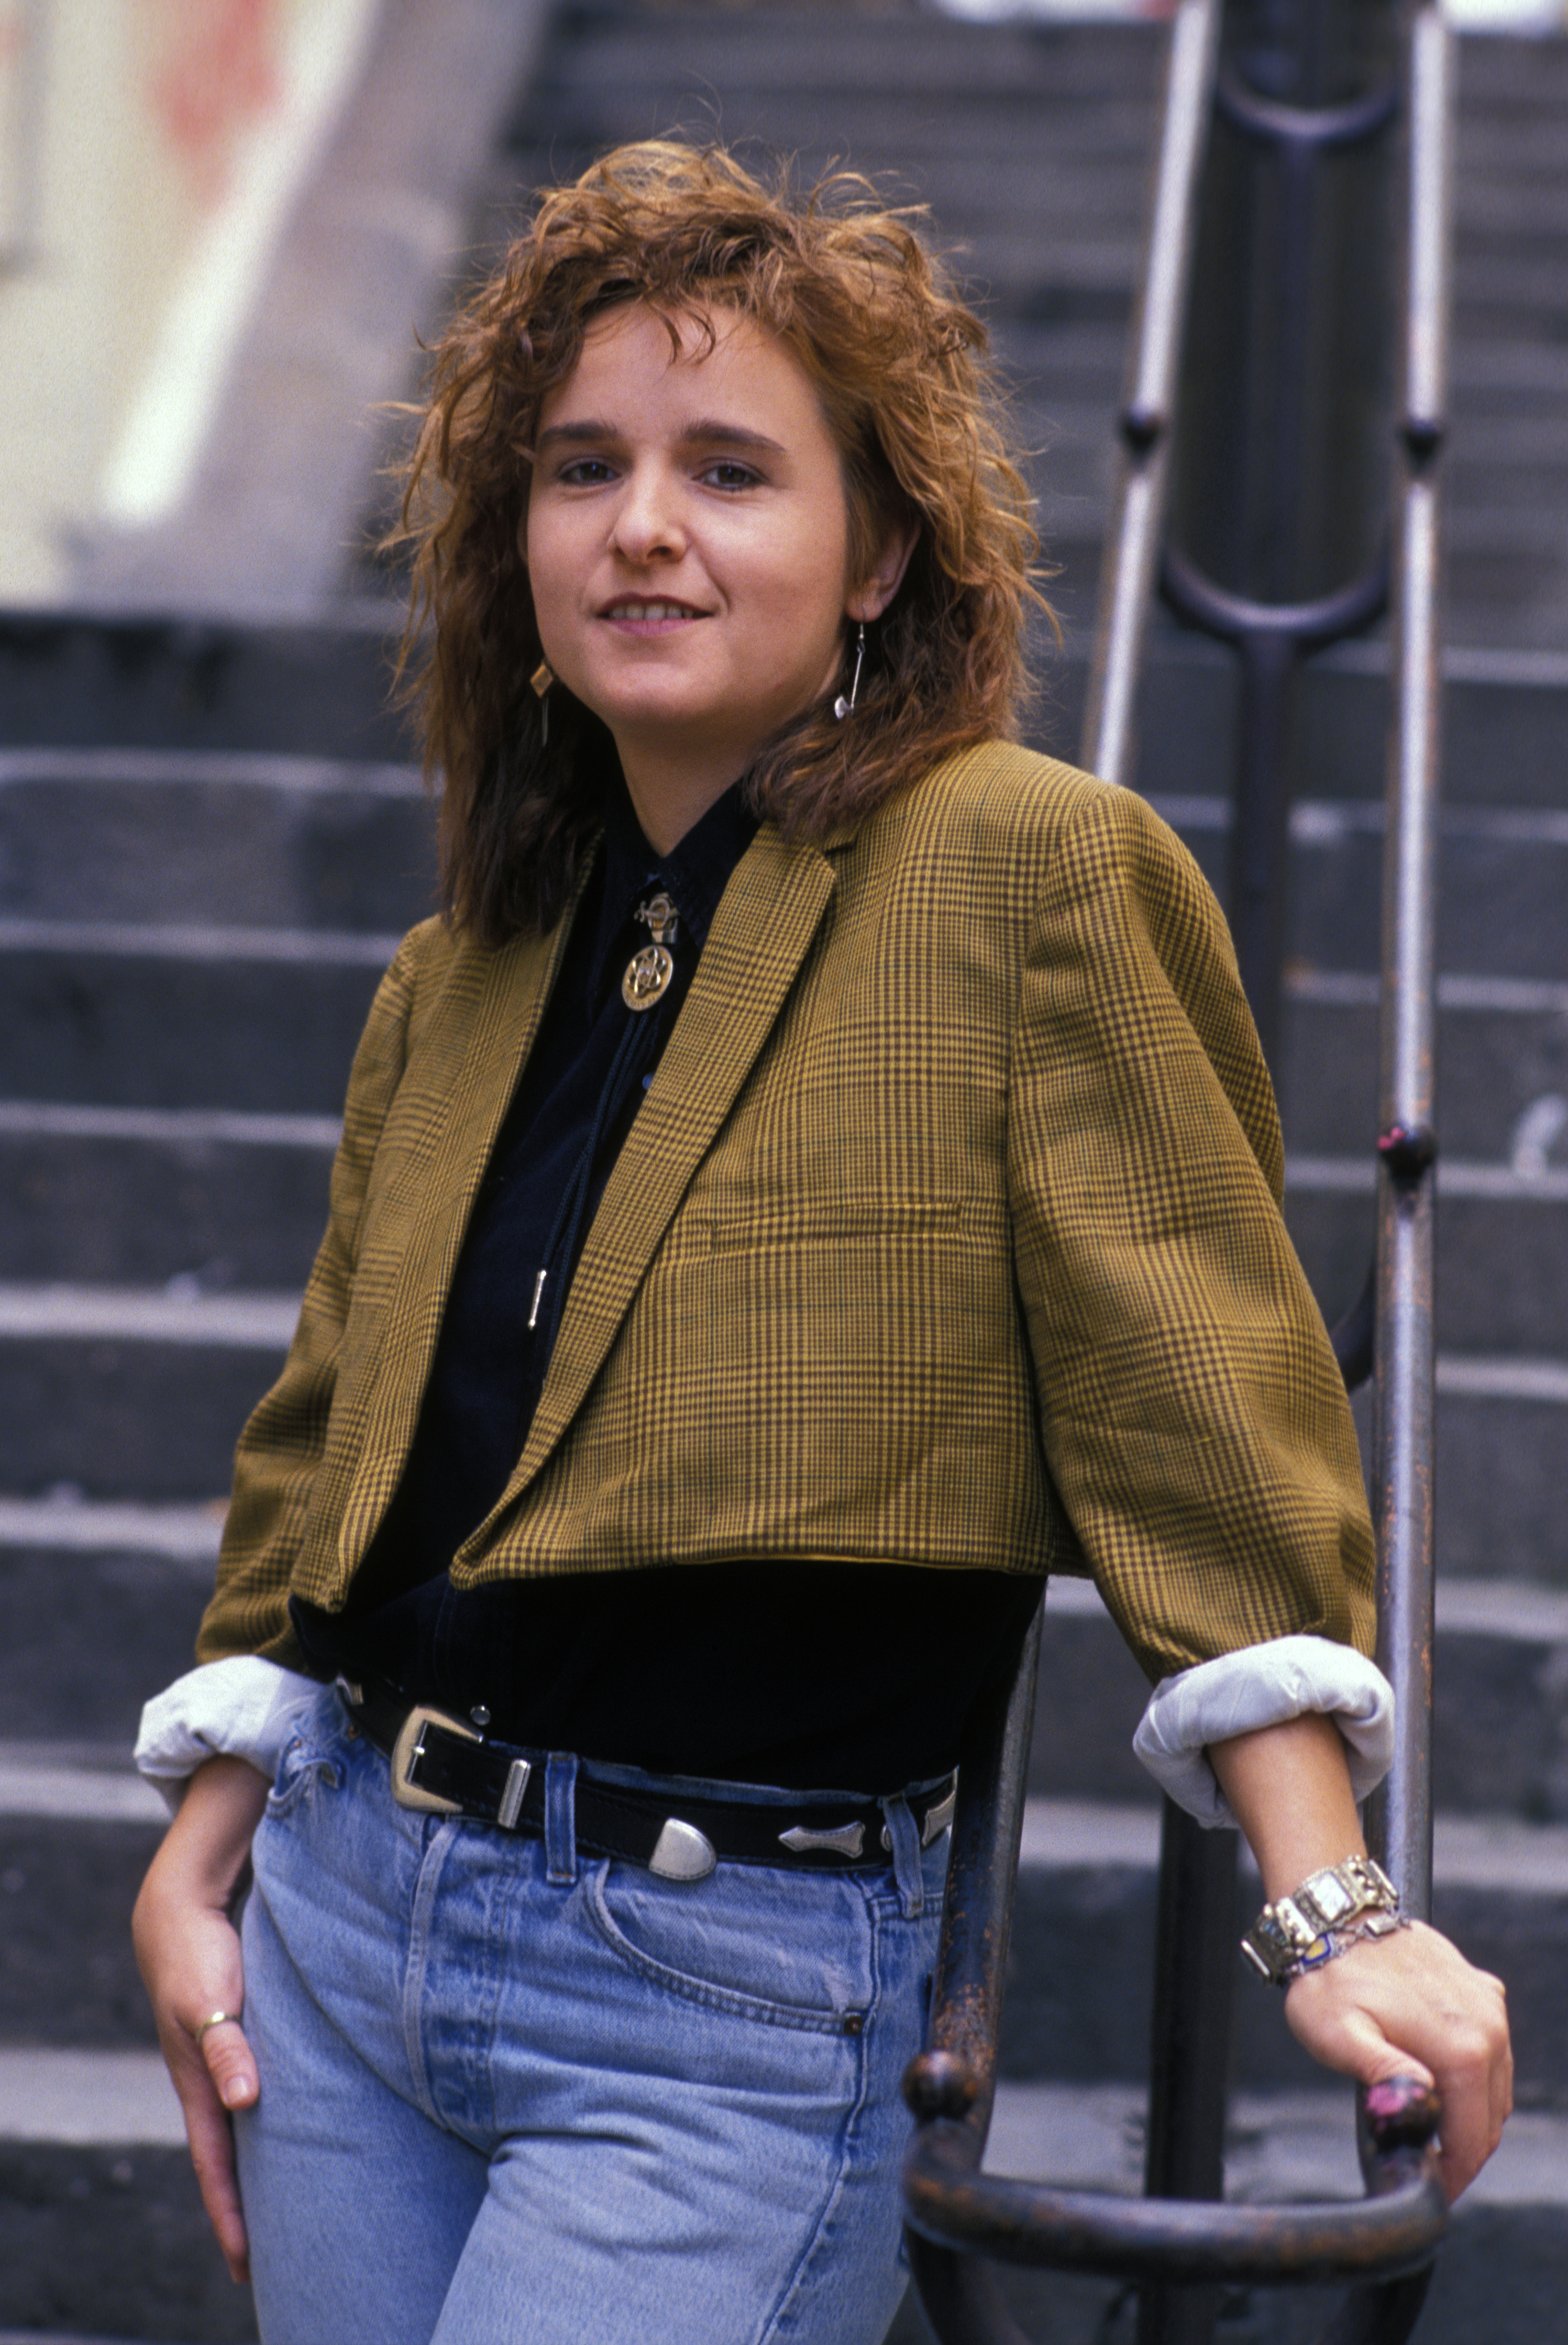 Melissa Lou Etheridge in Paris, France in 1988 | Source: Getty Images